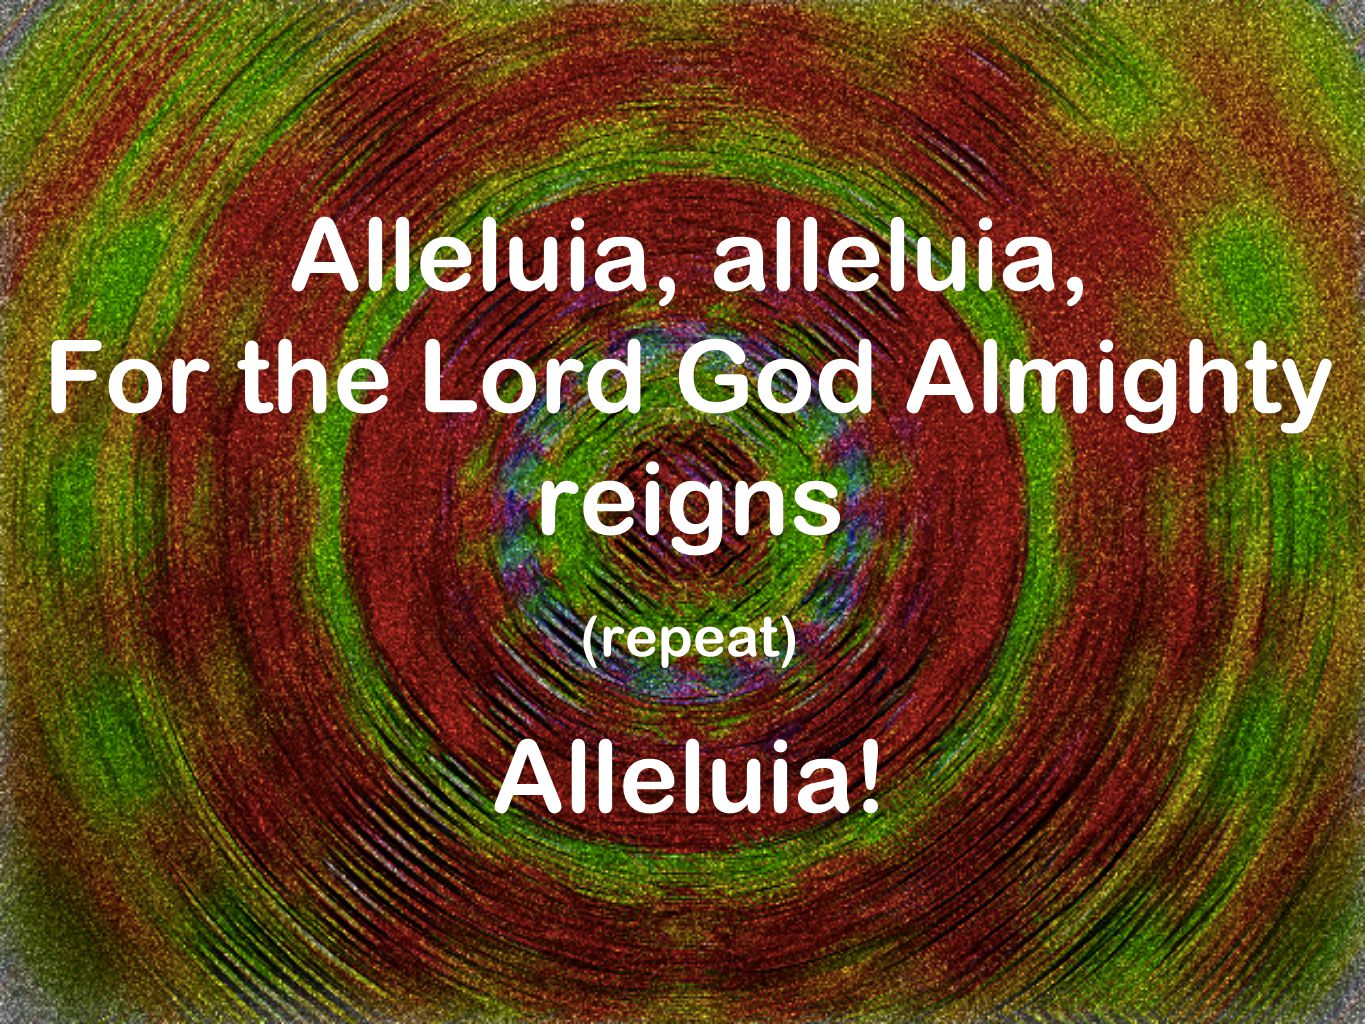 Alleluia, alleluia, For the Lord God Almighty reigns (repeat) Alleluia!